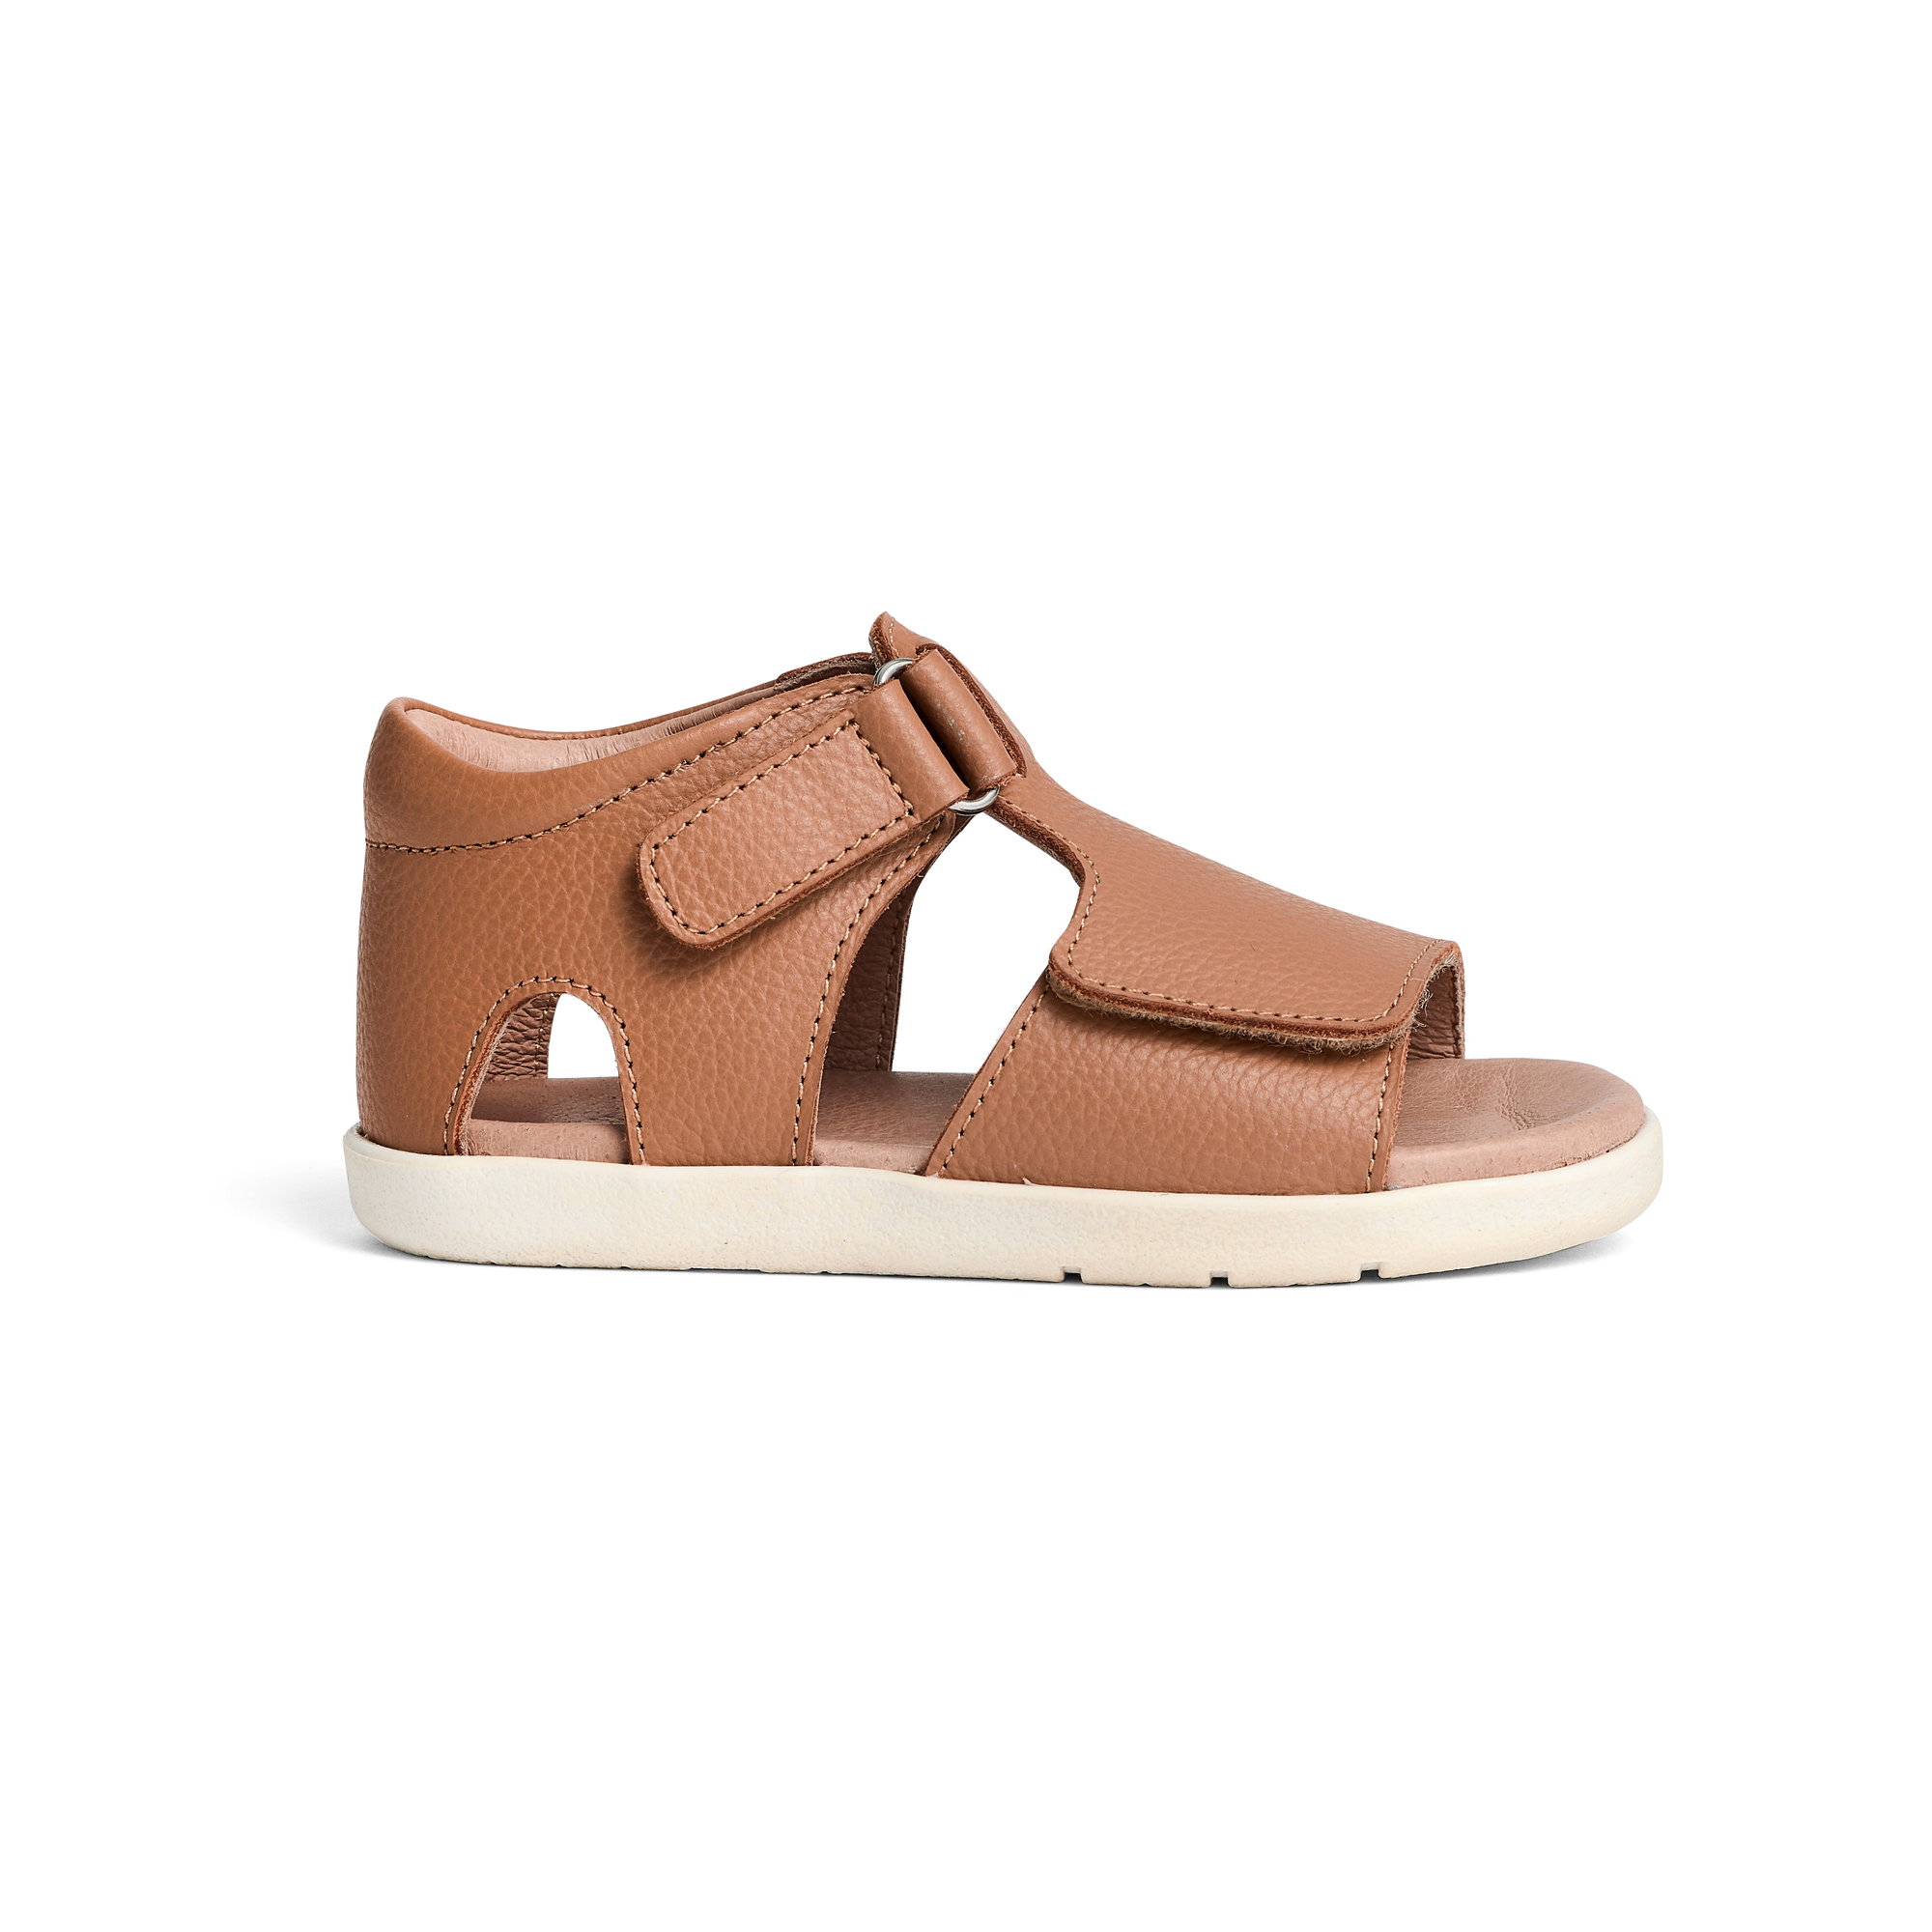 kids leather sandal - angus and dudley